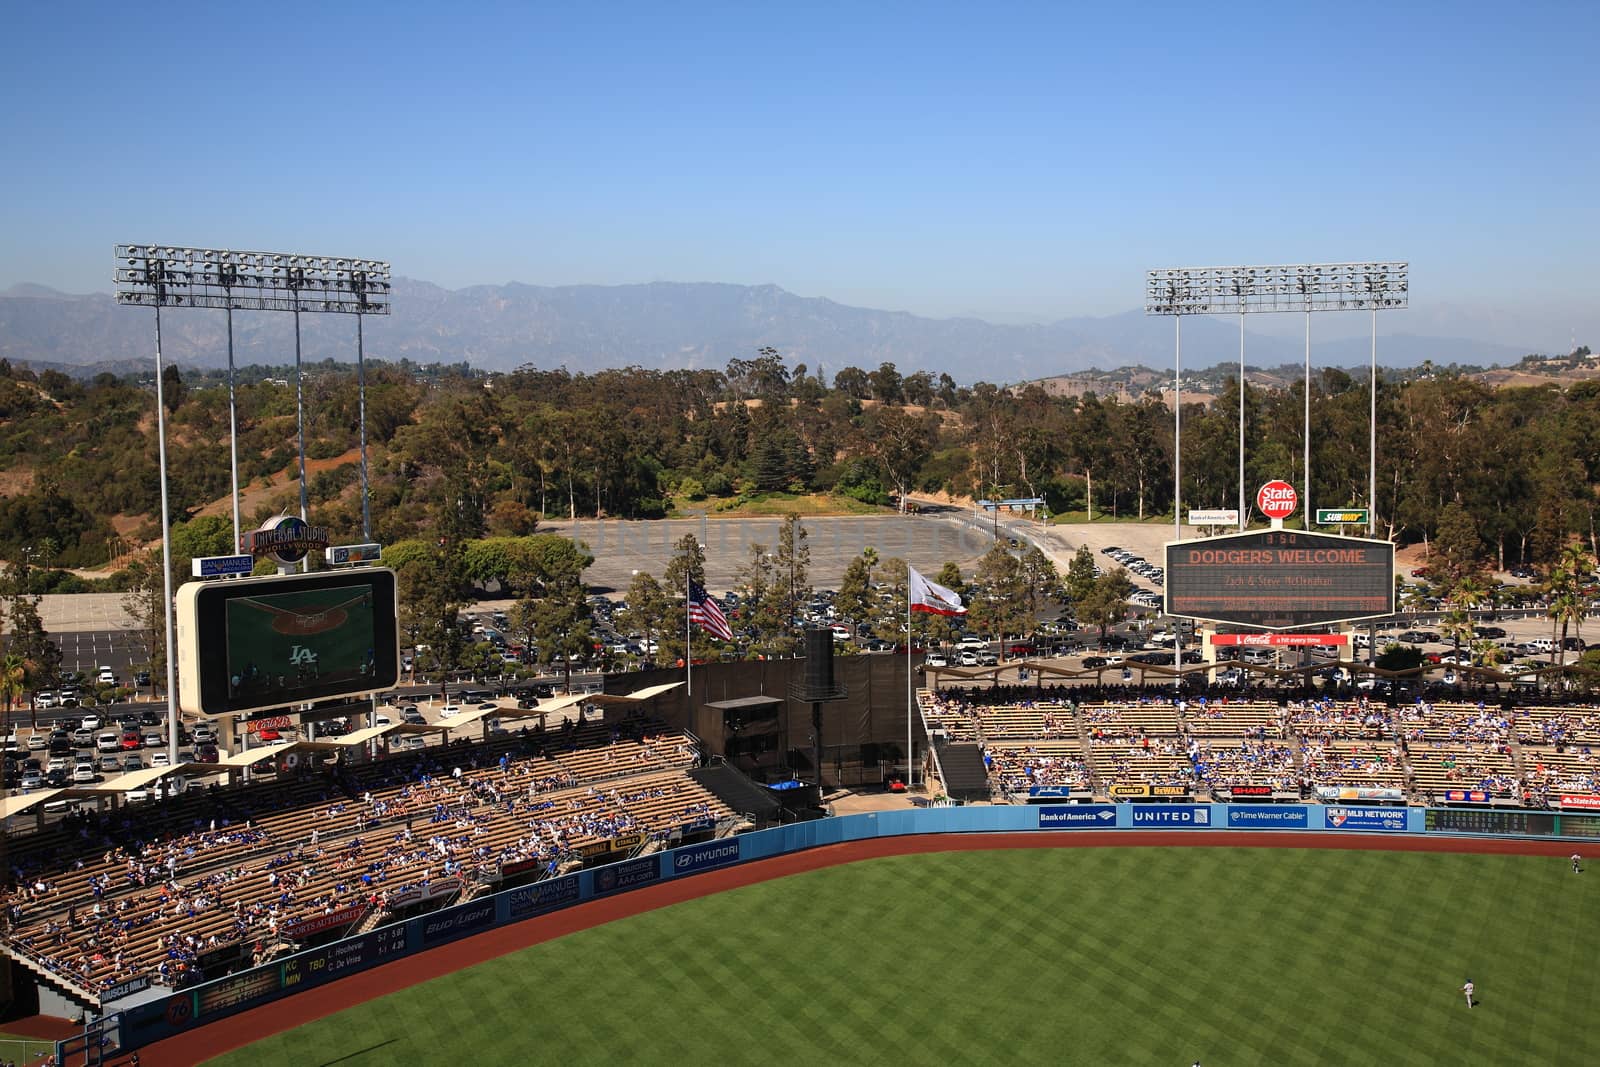 Scoreboards and bleachers at a Dodgers baseball game at Dodger Stadium in Los Angeles.